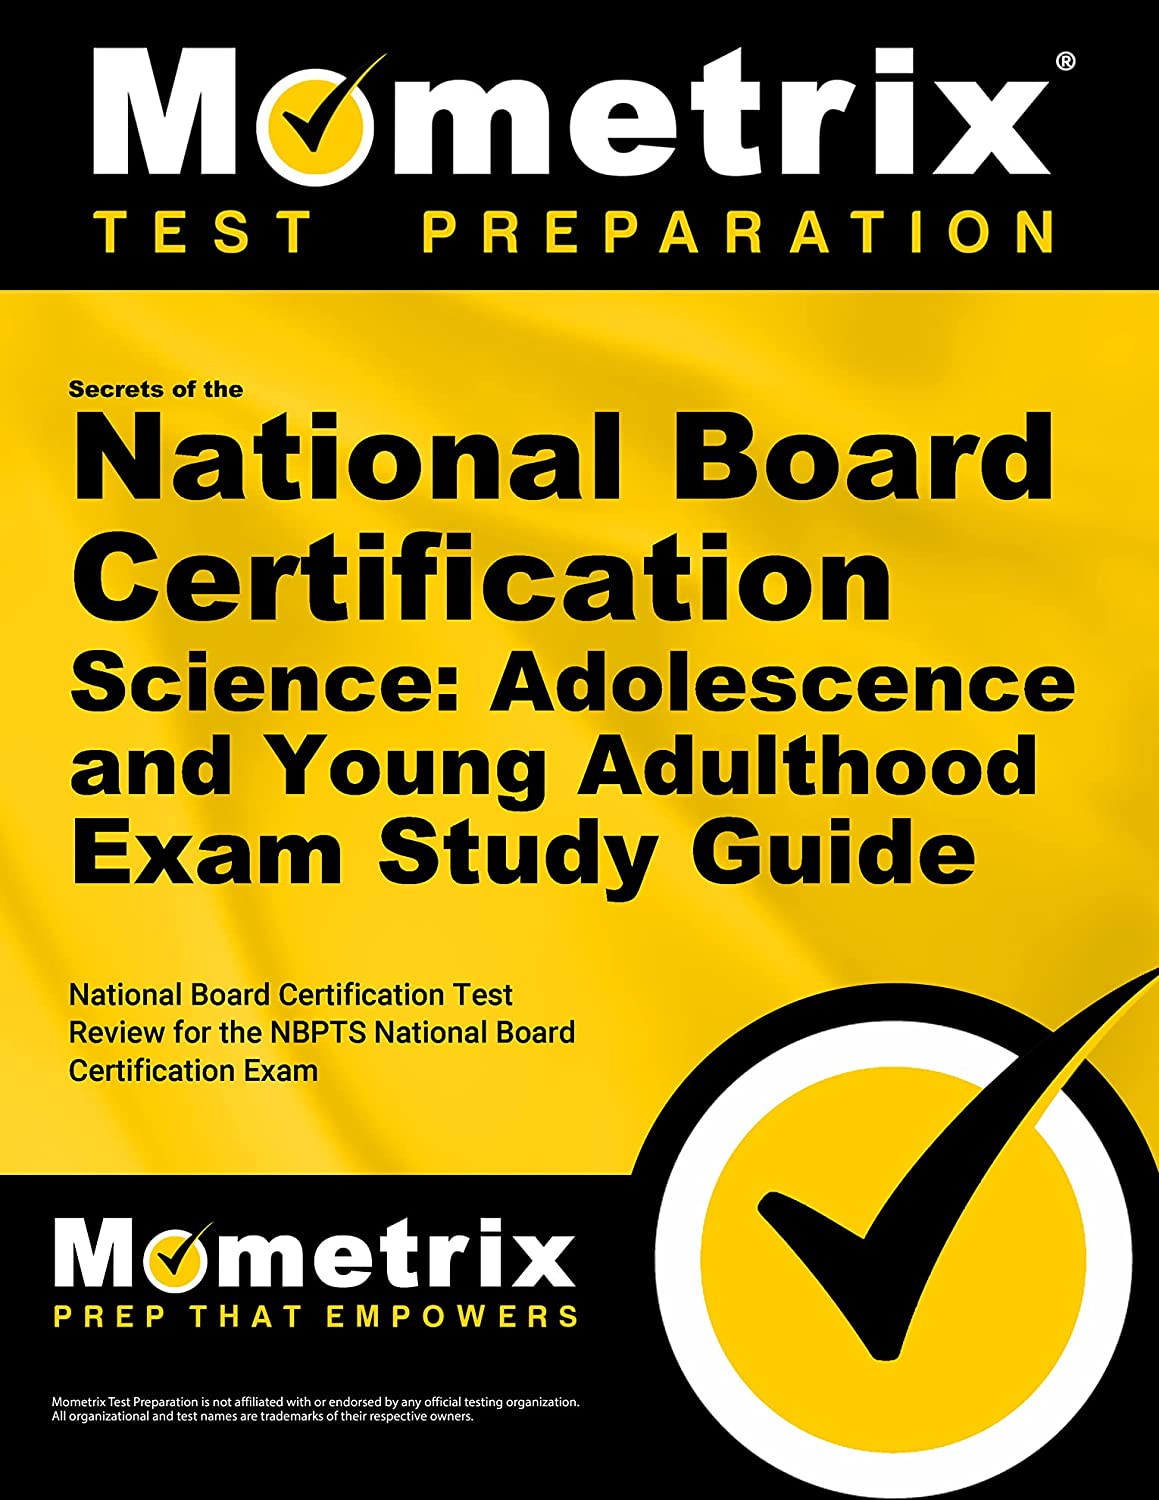 Secrets of the National Board Certification Science: Adolescence and Young Adulthood Exam Study Guide: National Board Certification Test Review for the NBPTS National Board Certification Exam